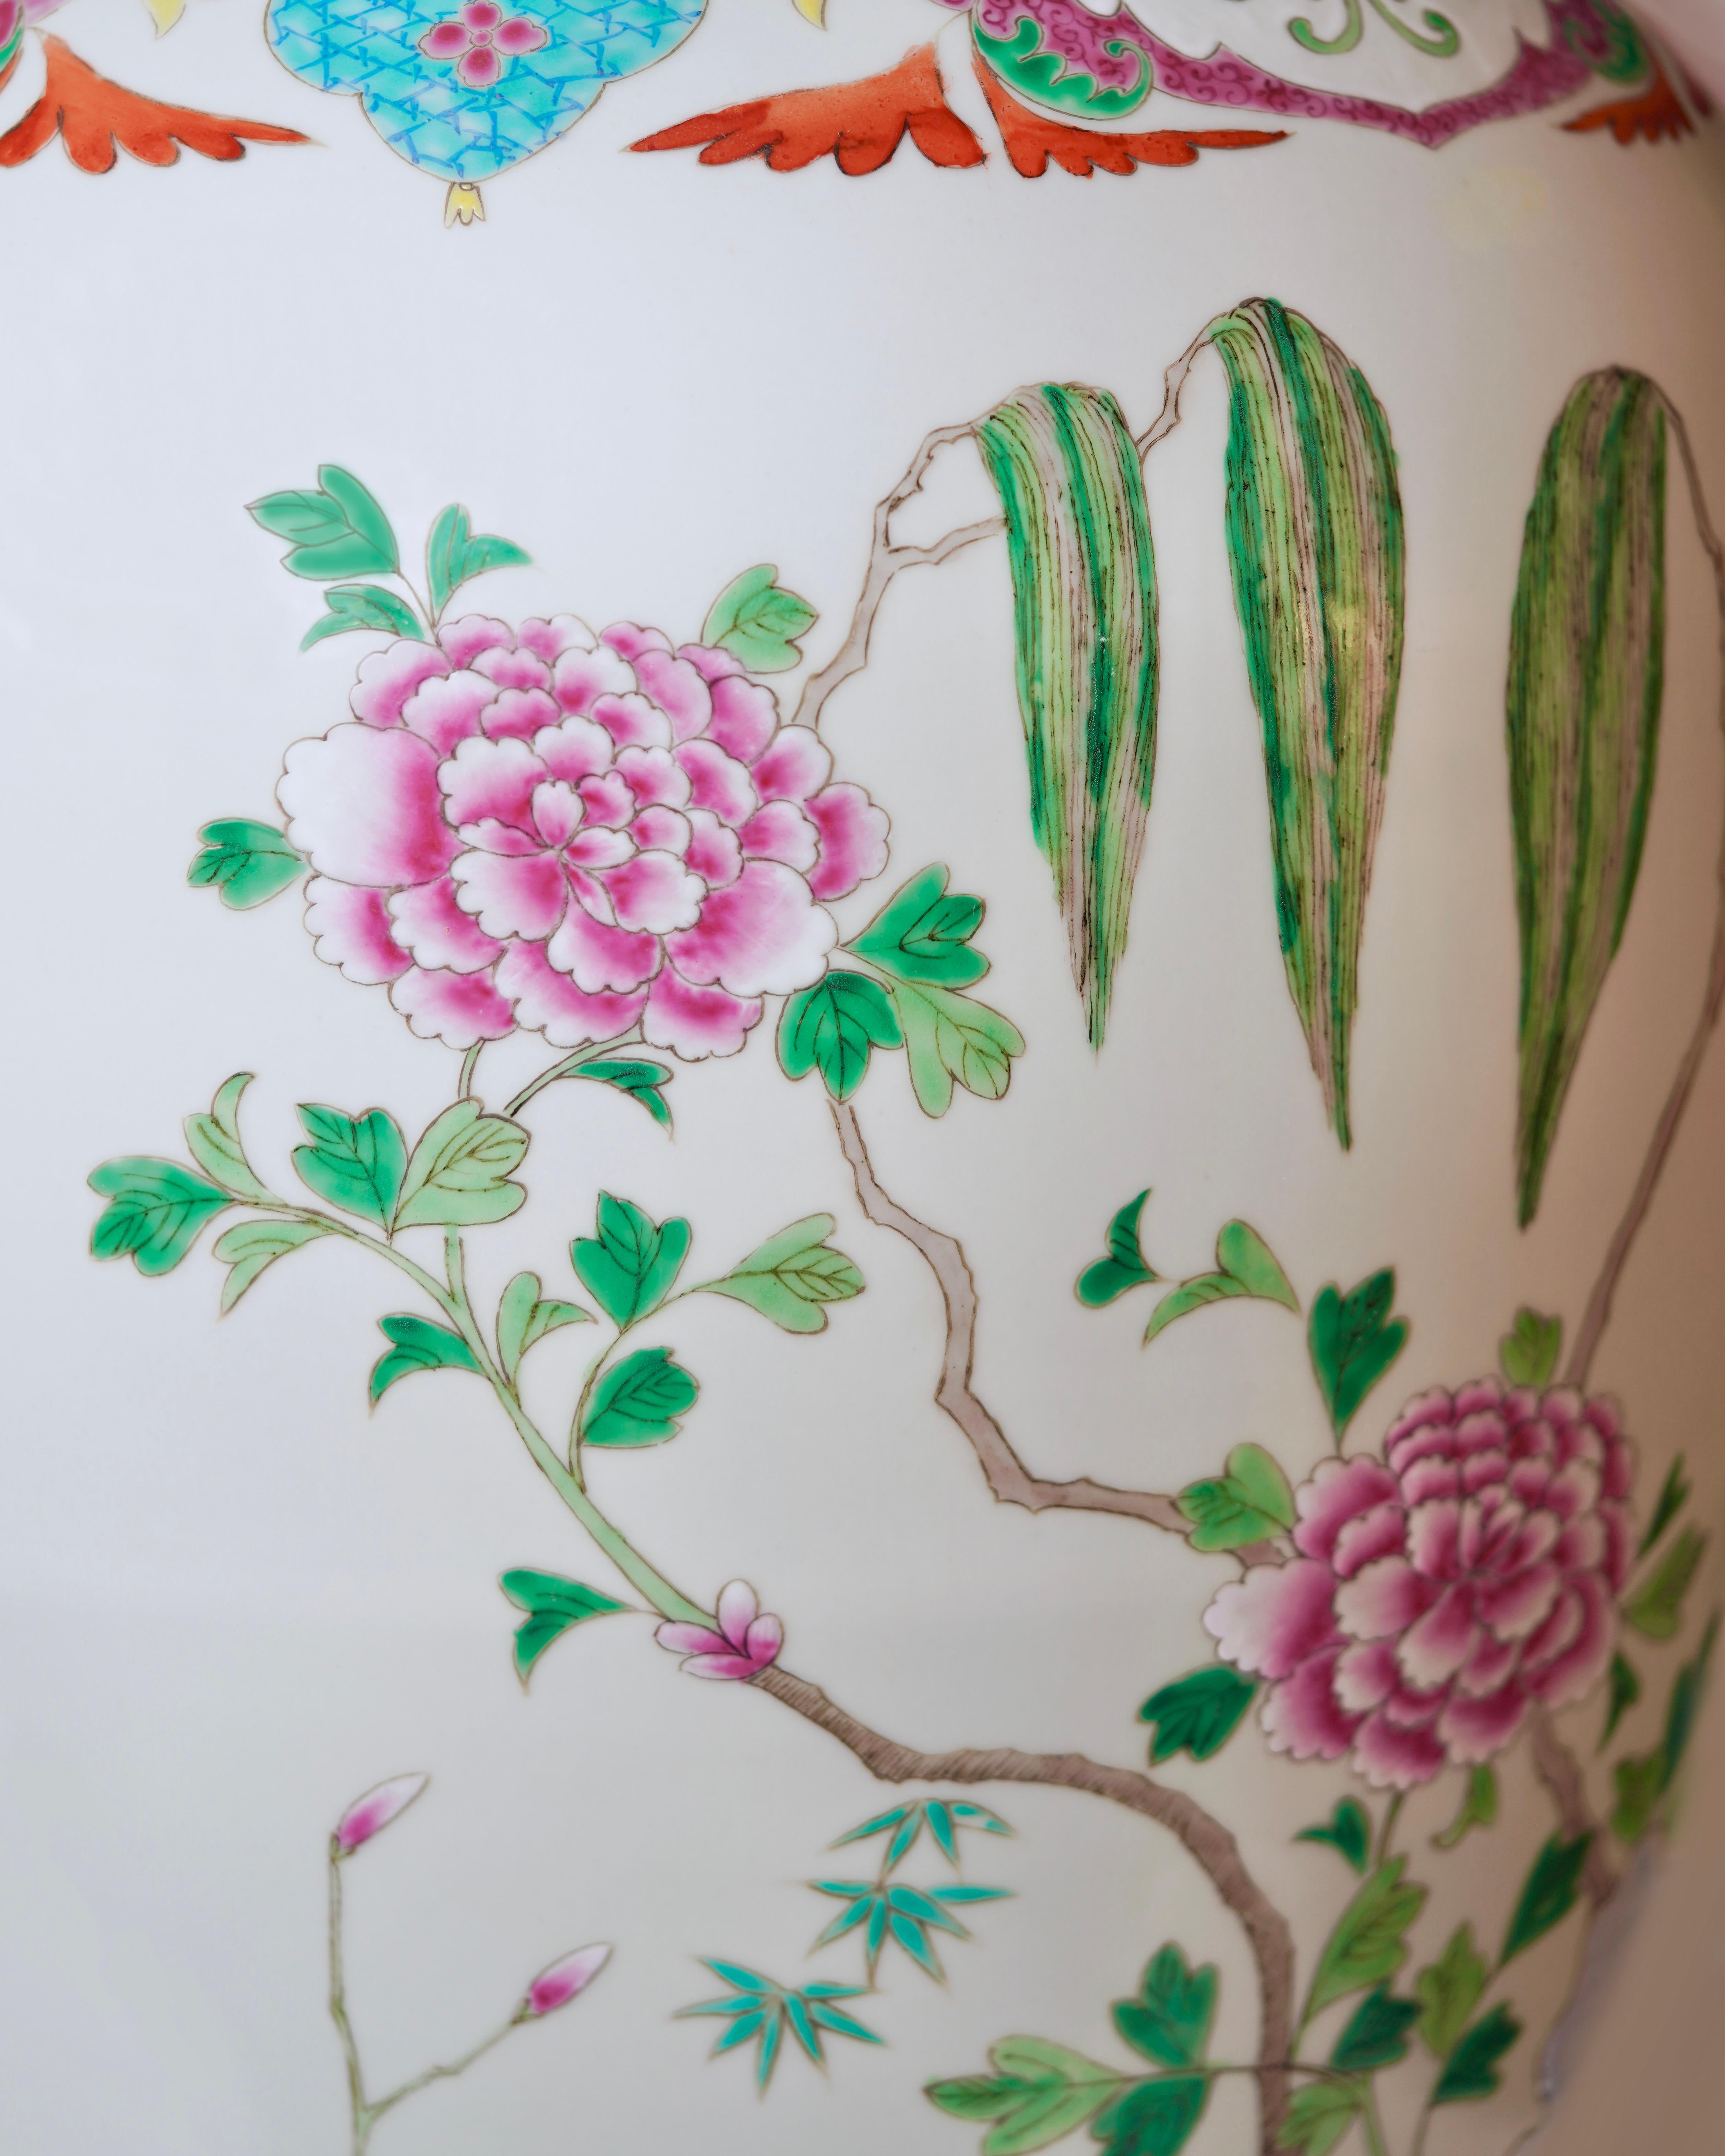 This large vintage floor vase is a traditional porcelain vessel from Jingdezhen, a town long distinguished by imperial patronage. The lively hand-painted sprays and tropical greenery complement the traditional garden landscape elements hand painted